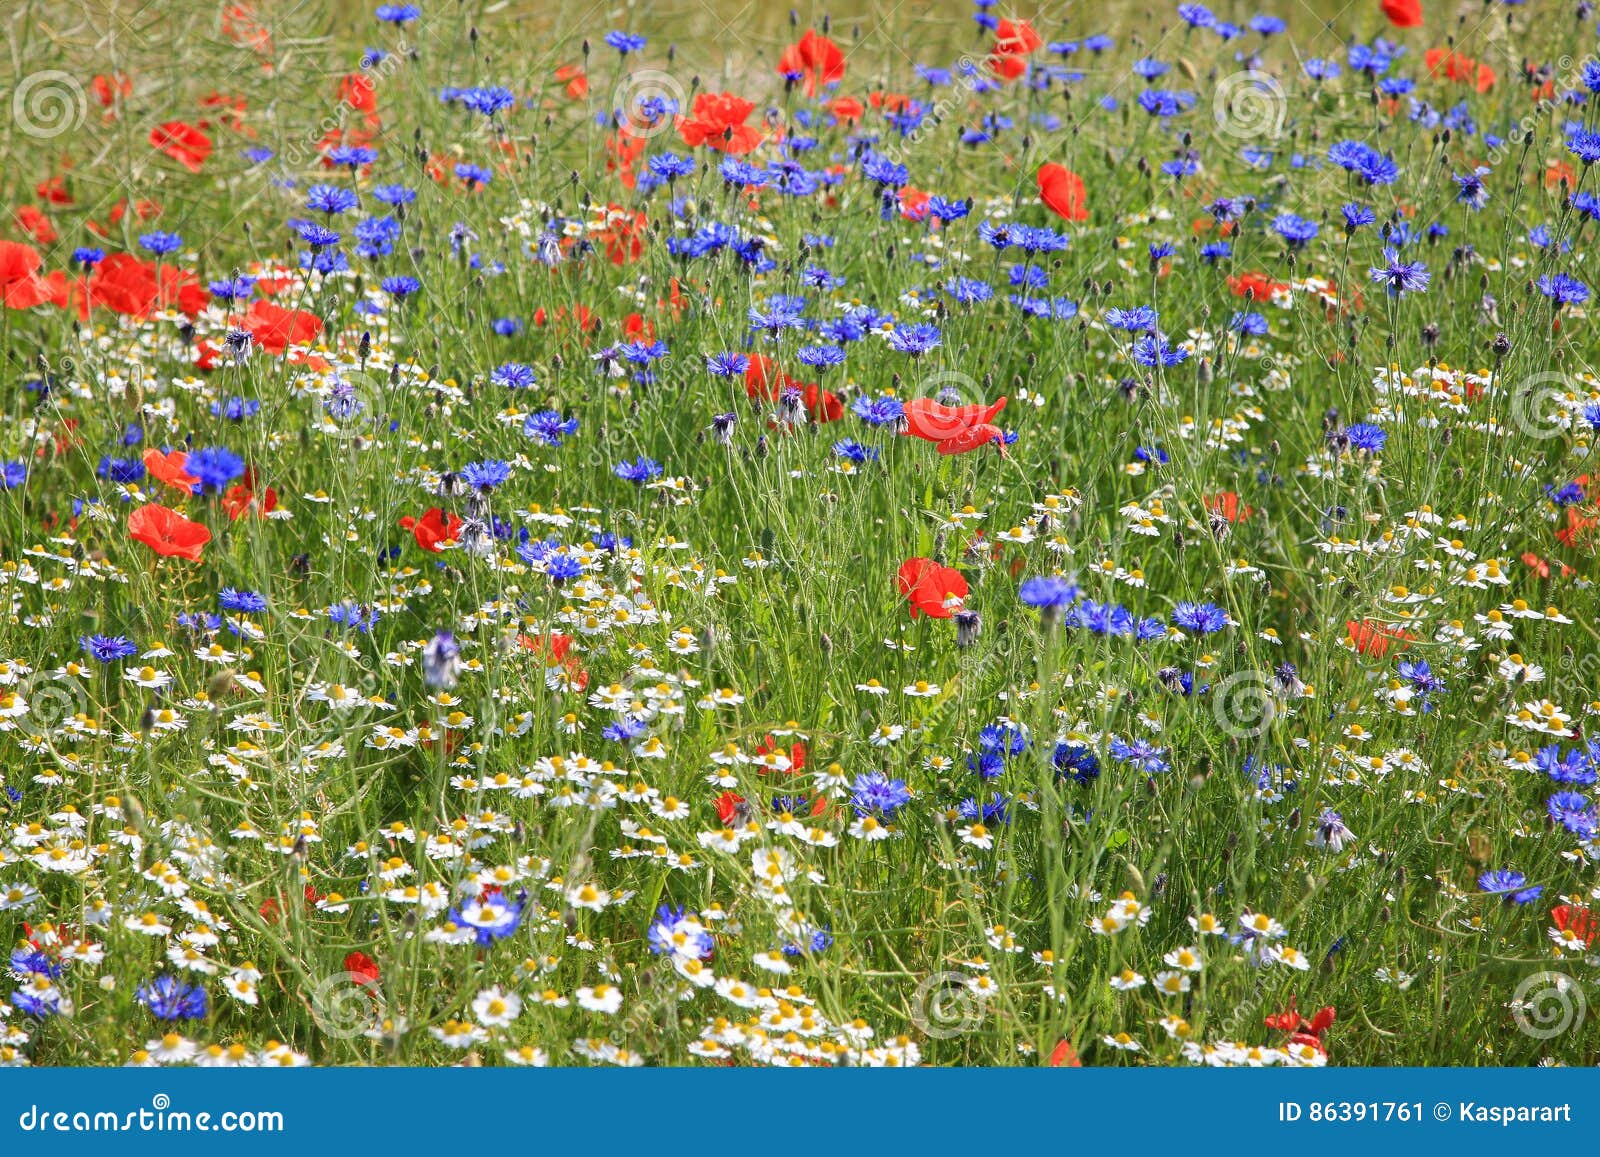 wildflower meadow with poppies, cornflowers and daisies